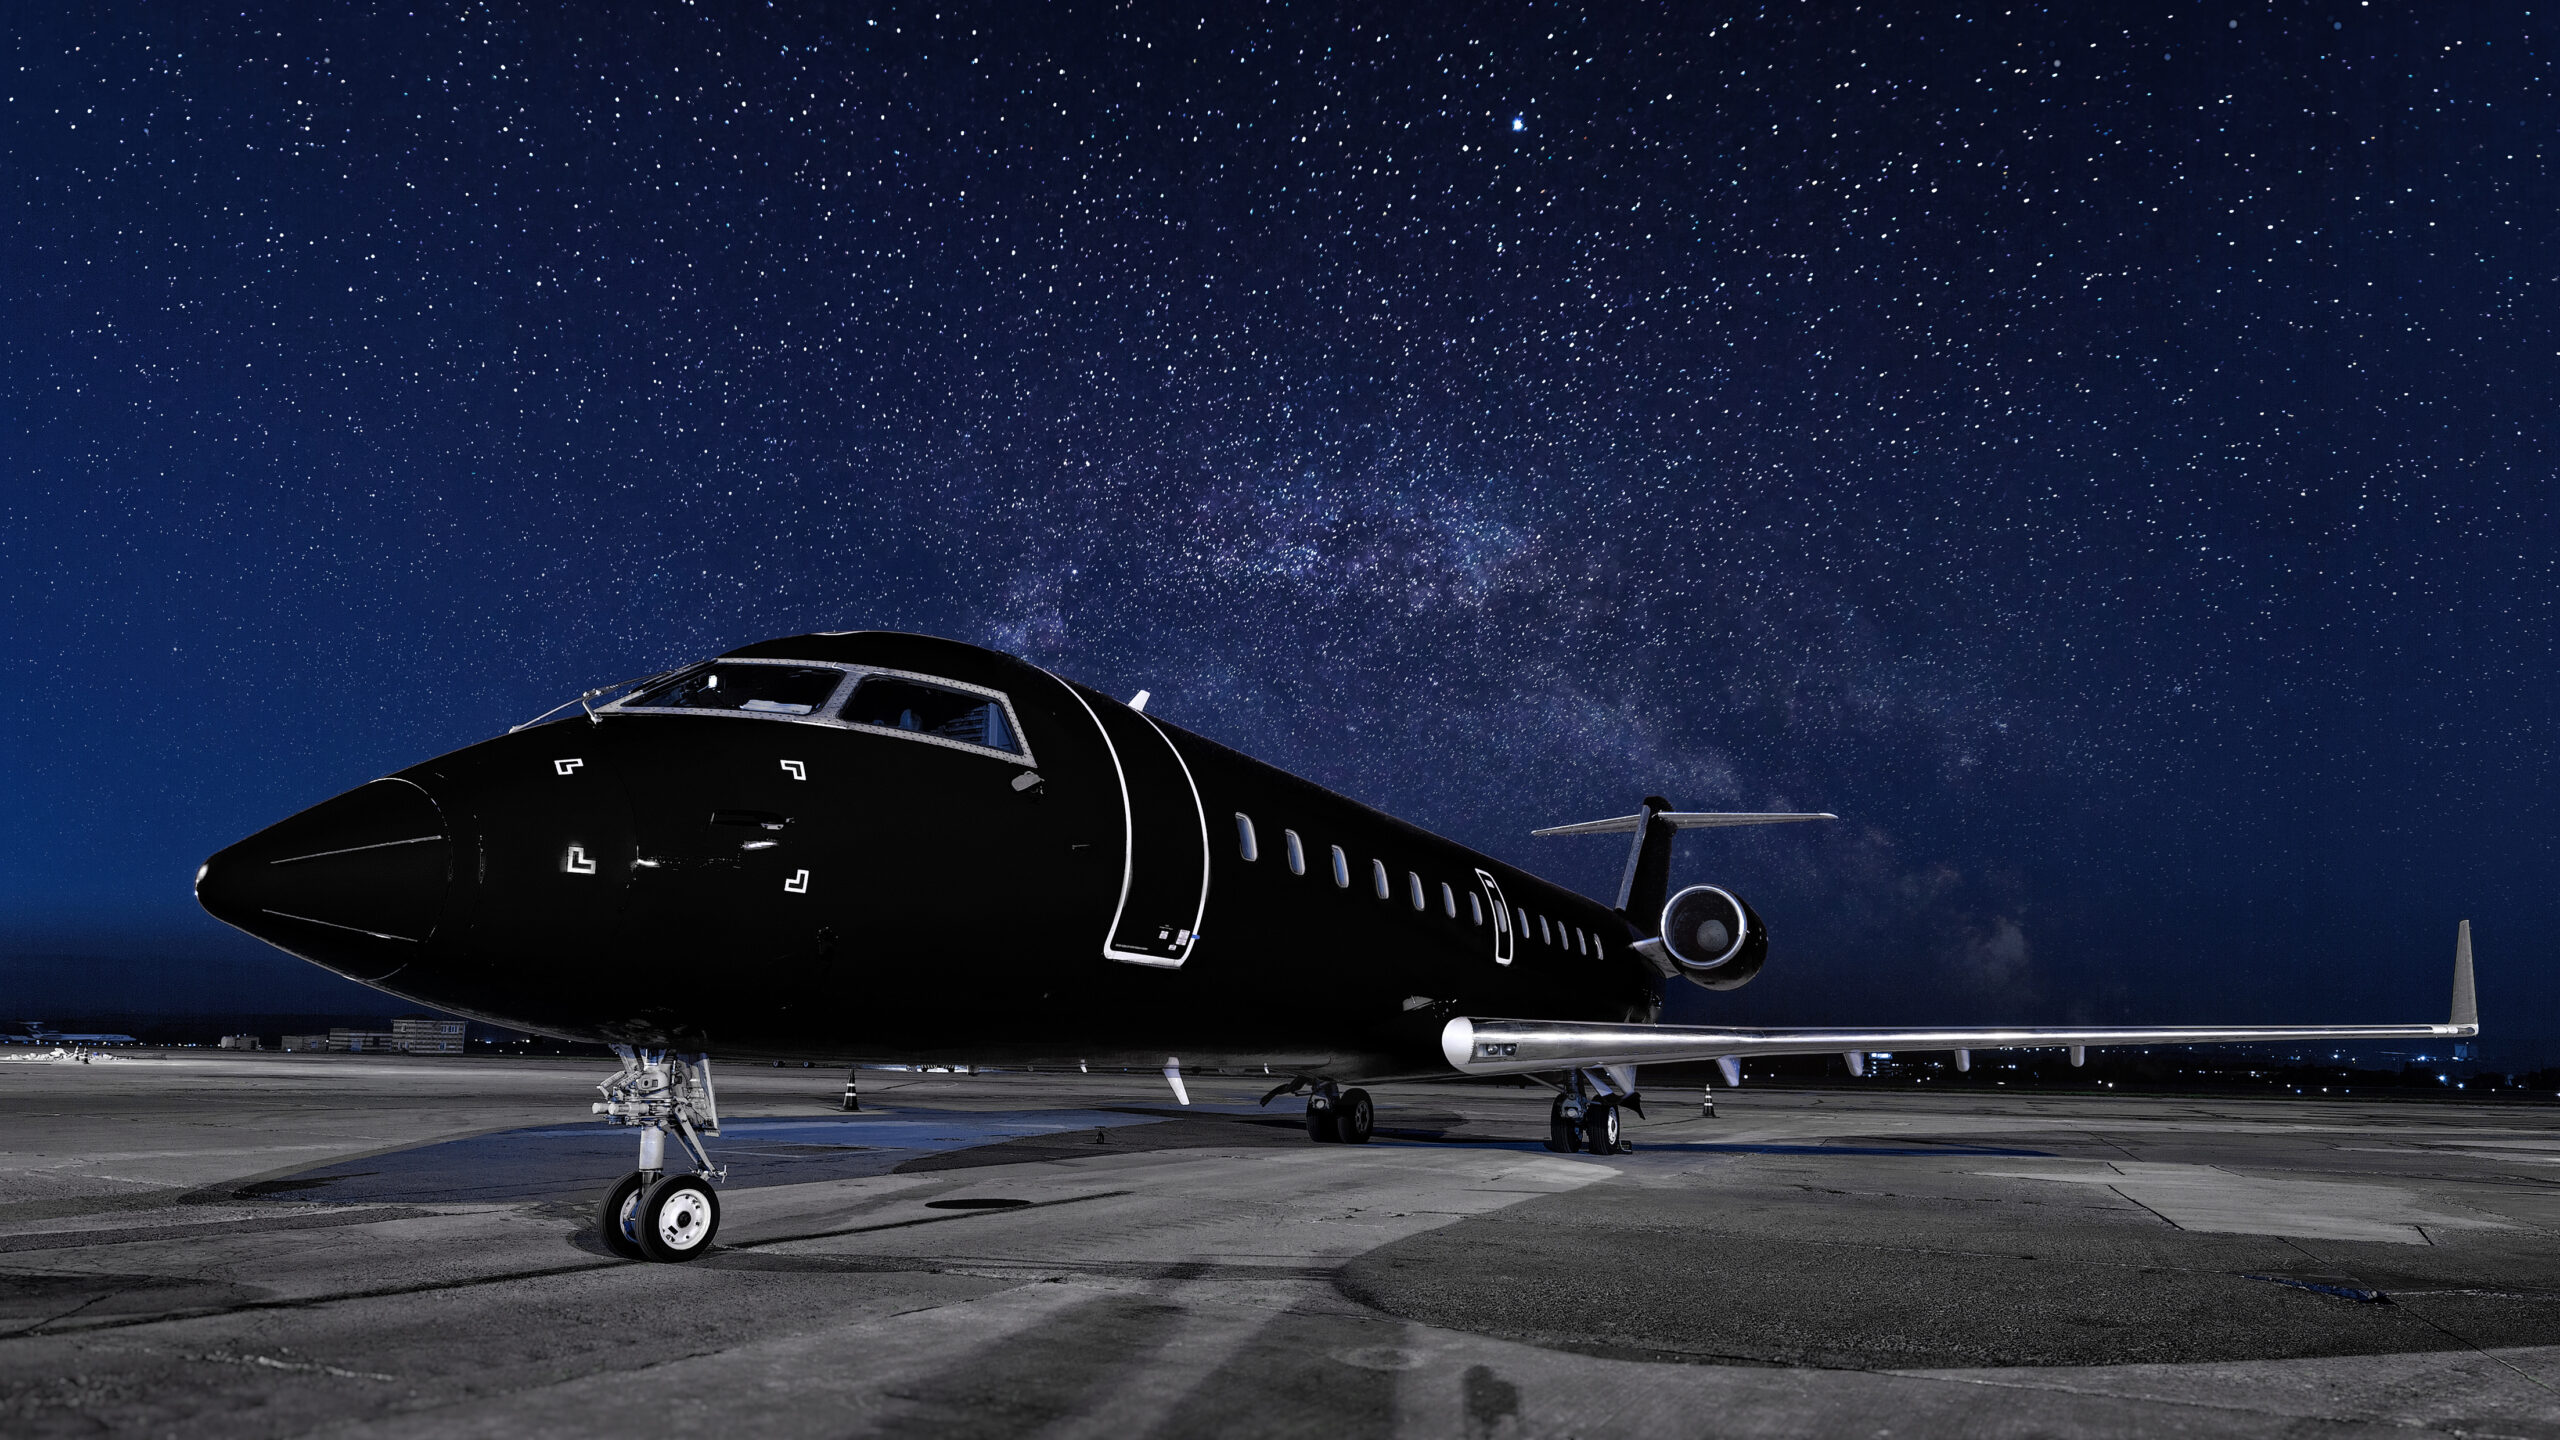 Private jet at night